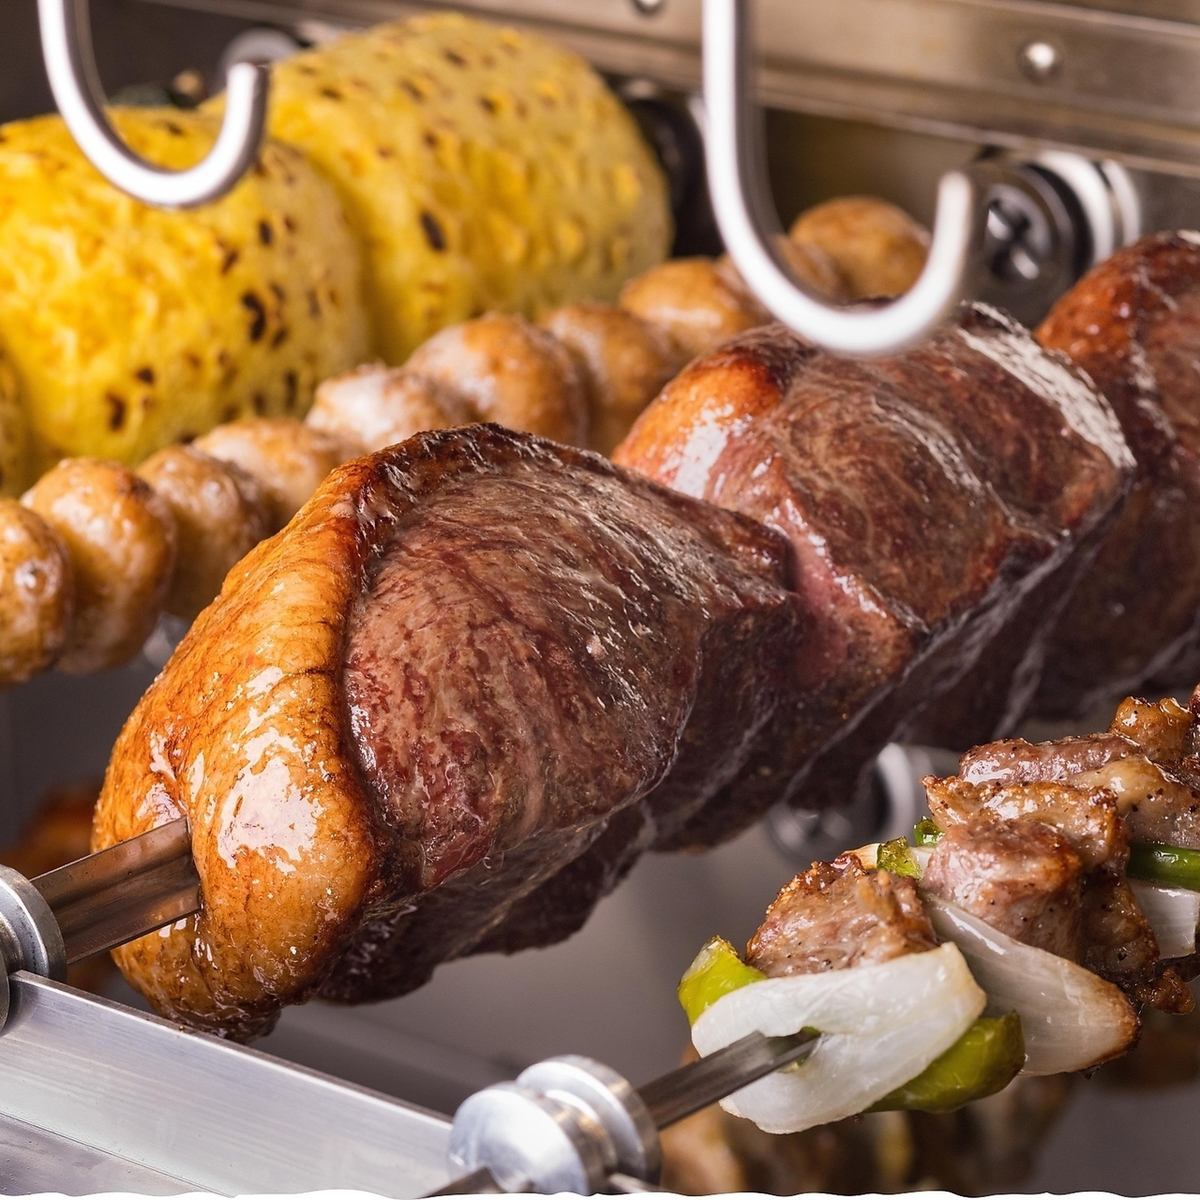 All-you-can-eat 20 kinds of Churrasco!